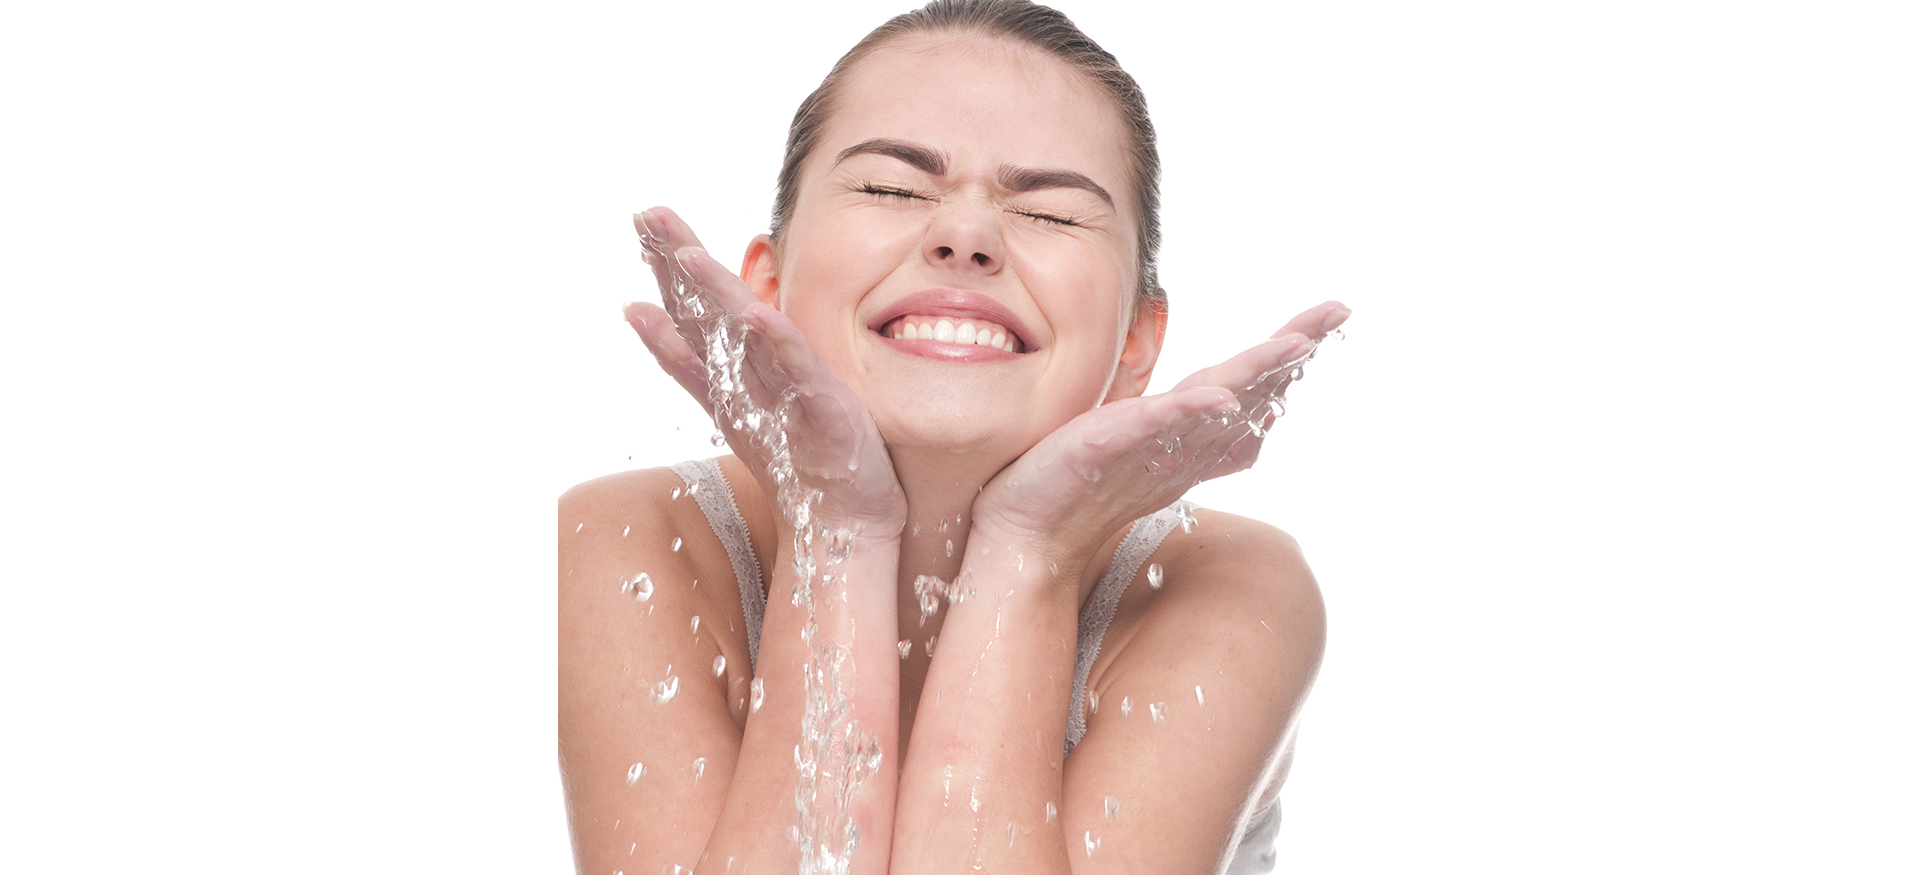 A Guide To Picking The Right Face Wash For Teens